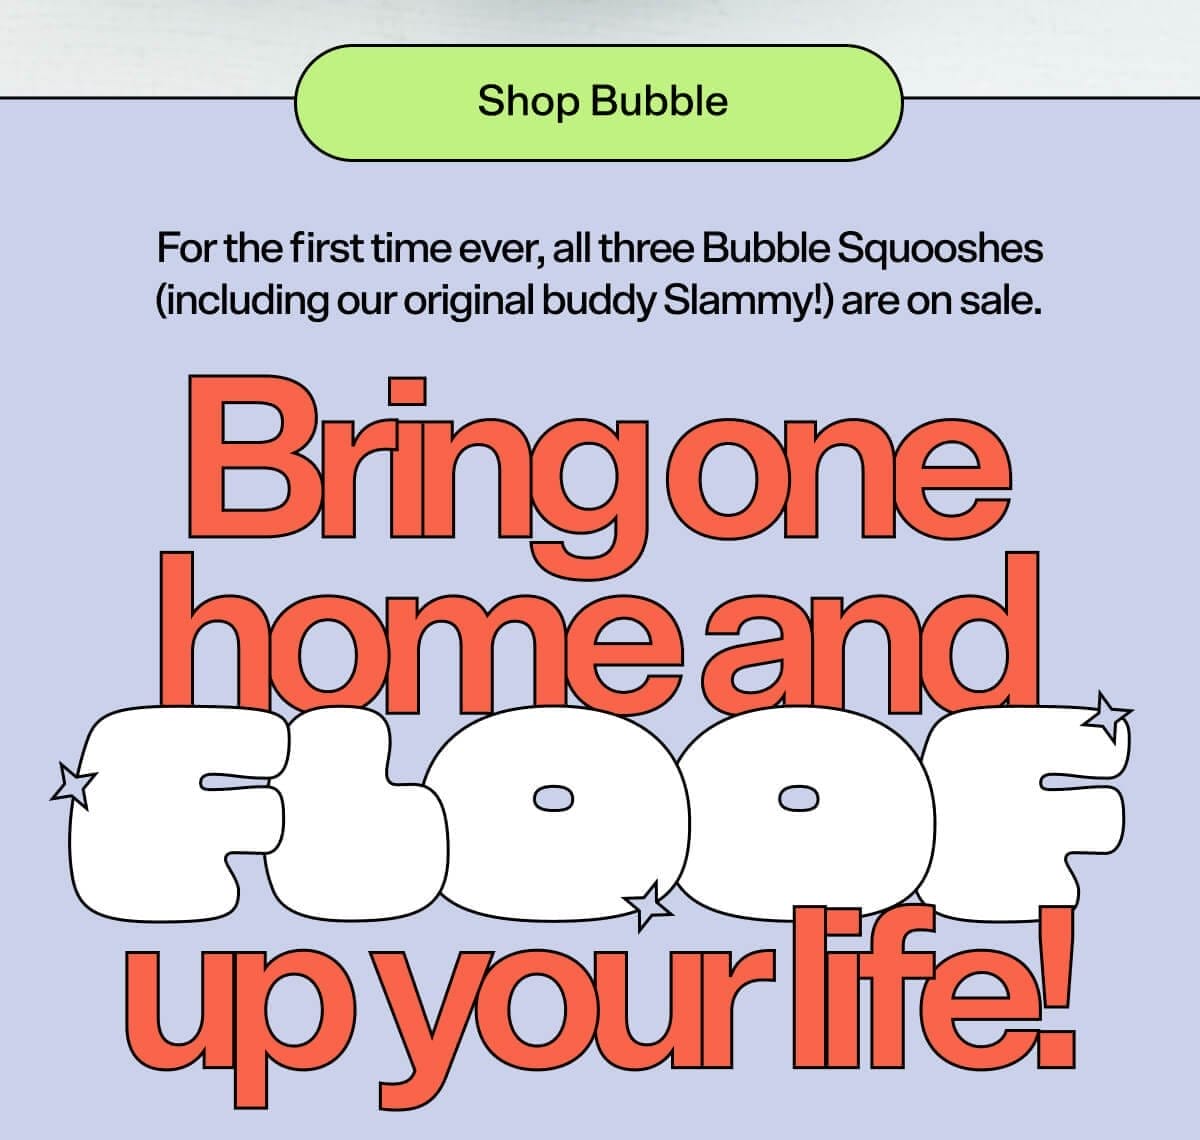 Shop Bubble. For the first time ever, all three Bubble Squooshes (including our original buddy Slammy!) are on sale. Bring one home and FLOOF up your life!